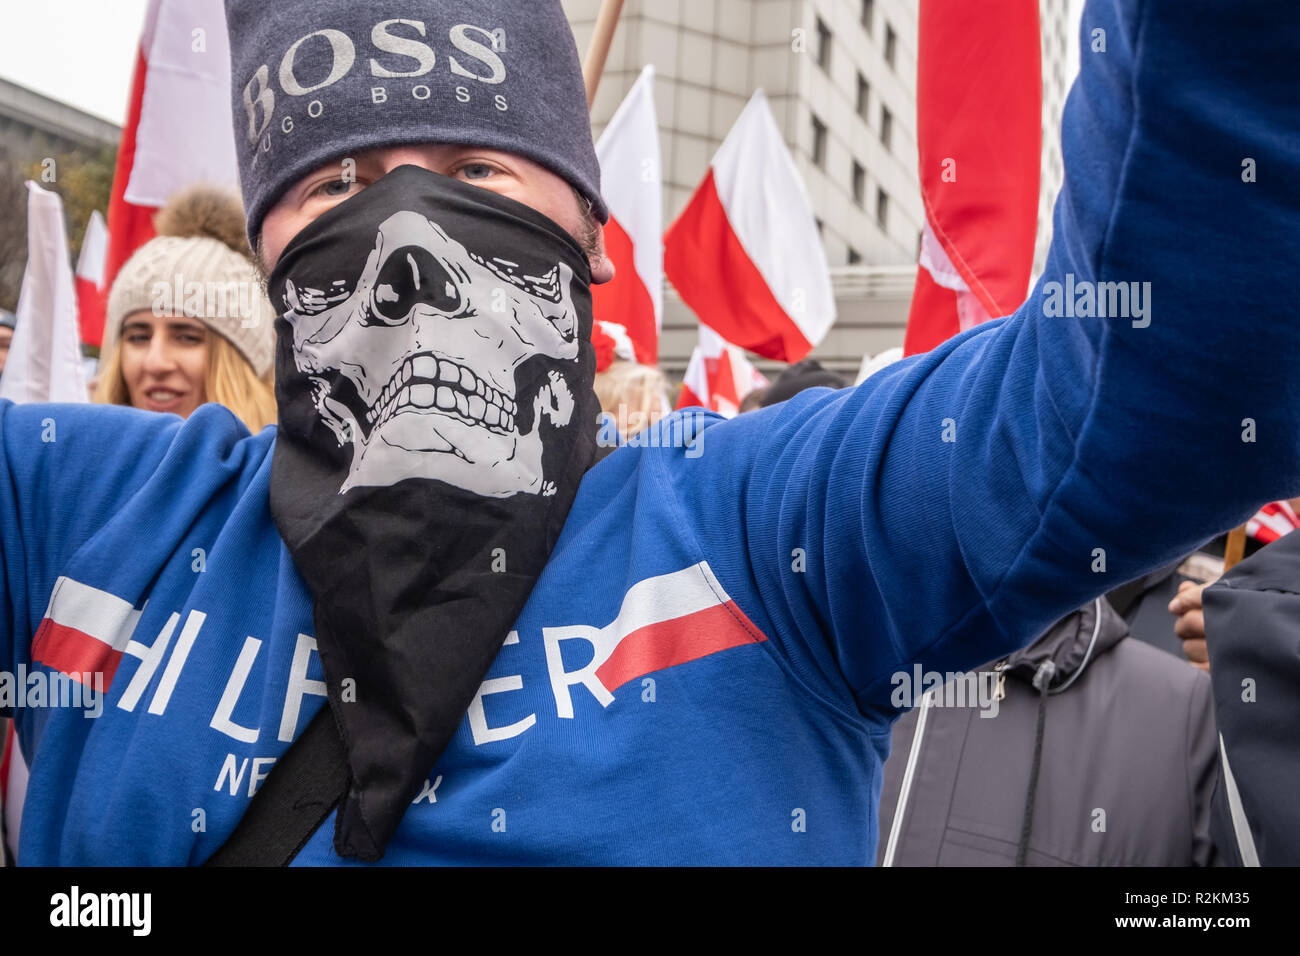 Warsaw, Poland - November 11, 2018: 200 000+ participated in Independence March, some of them chanting nationalist and xenophobic slogans. Stock Photo